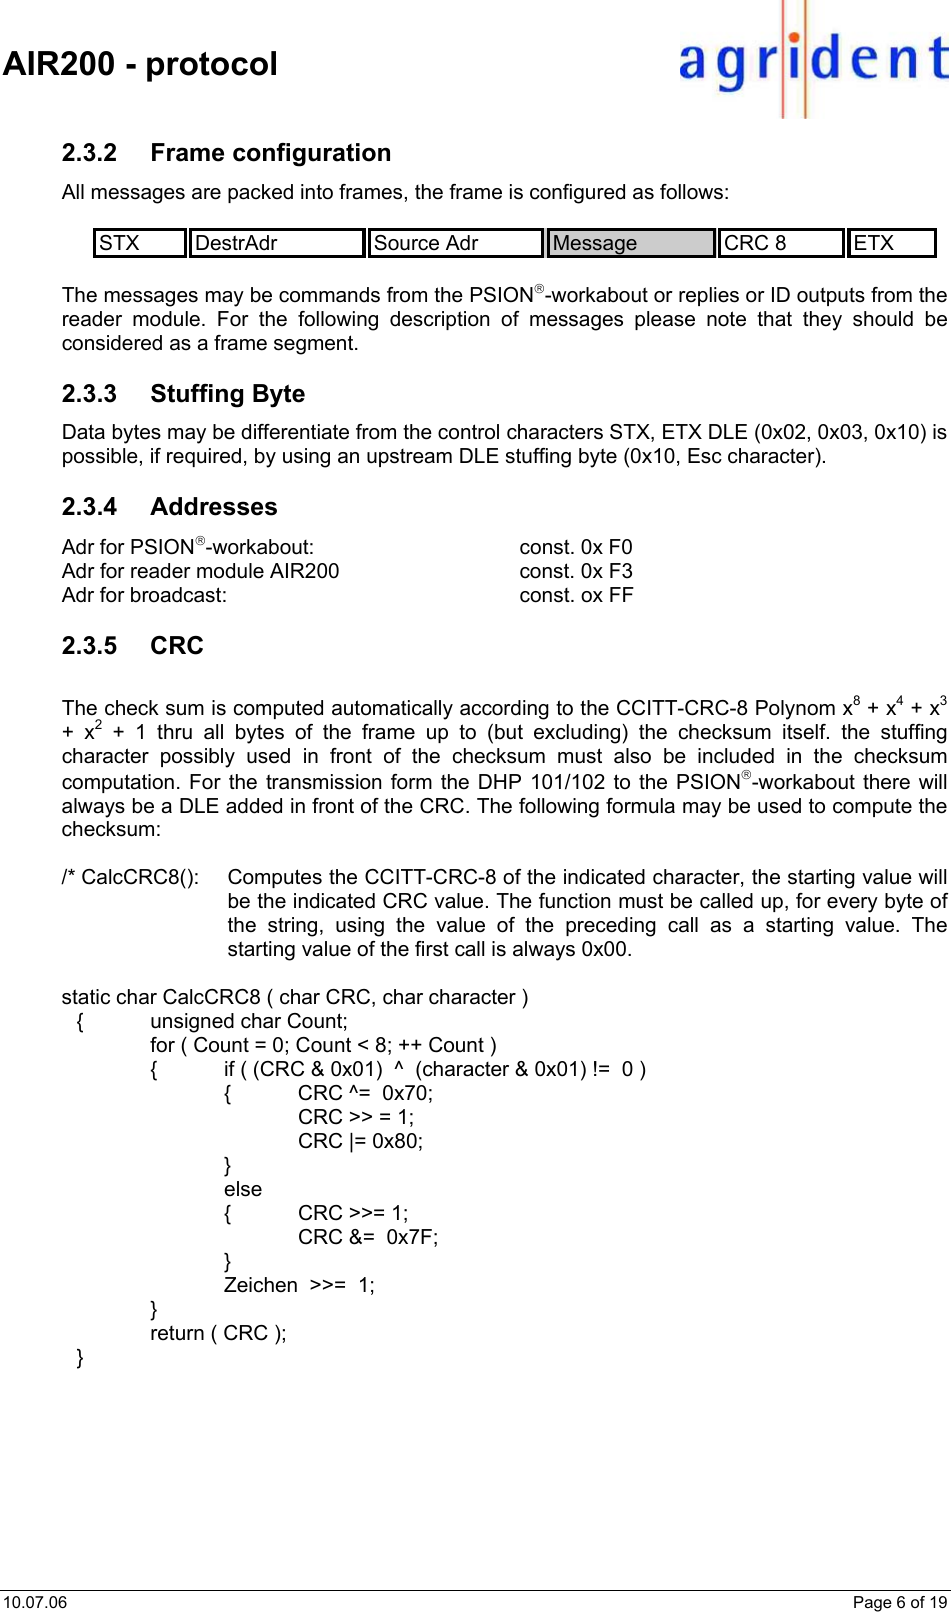    AIR200 - protocol  10.07.06    Page 6 of 19 2.3.2 Frame configuration All messages are packed into frames, the frame is configured as follows:  STX  DestrAdr  Source Adr  Message  CRC 8  ETX  The messages may be commands from the PSION-workabout or replies or ID outputs from the reader module. For the following description of messages please note that they should be considered as a frame segment.  2.3.3 Stuffing Byte Data bytes may be differentiate from the control characters STX, ETX DLE (0x02, 0x03, 0x10) is possible, if required, by using an upstream DLE stuffing byte (0x10, Esc character).  2.3.4 Addresses Adr for PSION-workabout:   const. 0x F0 Adr for reader module AIR200      const. 0x F3 Adr for broadcast:        const. ox FF  2.3.5 CRC  The check sum is computed automatically according to the CCITT-CRC-8 Polynom x8 + x4 + x3 + x2 + 1 thru all bytes of the frame up to (but excluding) the checksum itself. the stuffing character possibly used in front of the checksum must also be included in the checksum computation. For the transmission form the DHP 101/102 to the PSION-workabout there will always be a DLE added in front of the CRC. The following formula may be used to compute the checksum:  /* CalcCRC8():  Computes the CCITT-CRC-8 of the indicated character, the starting value will be the indicated CRC value. The function must be called up, for every byte of the string, using the value of the preceding call as a starting value. The starting value of the first call is always 0x00.  static char CalcCRC8 ( char CRC, char character )   {  unsigned char Count;     for ( Count = 0; Count &lt; 8; ++ Count )     {  if ( (CRC &amp; 0x01)  ^  (character &amp; 0x01) !=  0 )       {  CRC ^=  0x70;         CRC &gt;&gt; = 1;     CRC |= 0x80;      }      else       {  CRC &gt;&gt;= 1;         CRC &amp;=  0x7F;      }       Zeichen  &gt;&gt;=  1;    }     return ( CRC );  }  